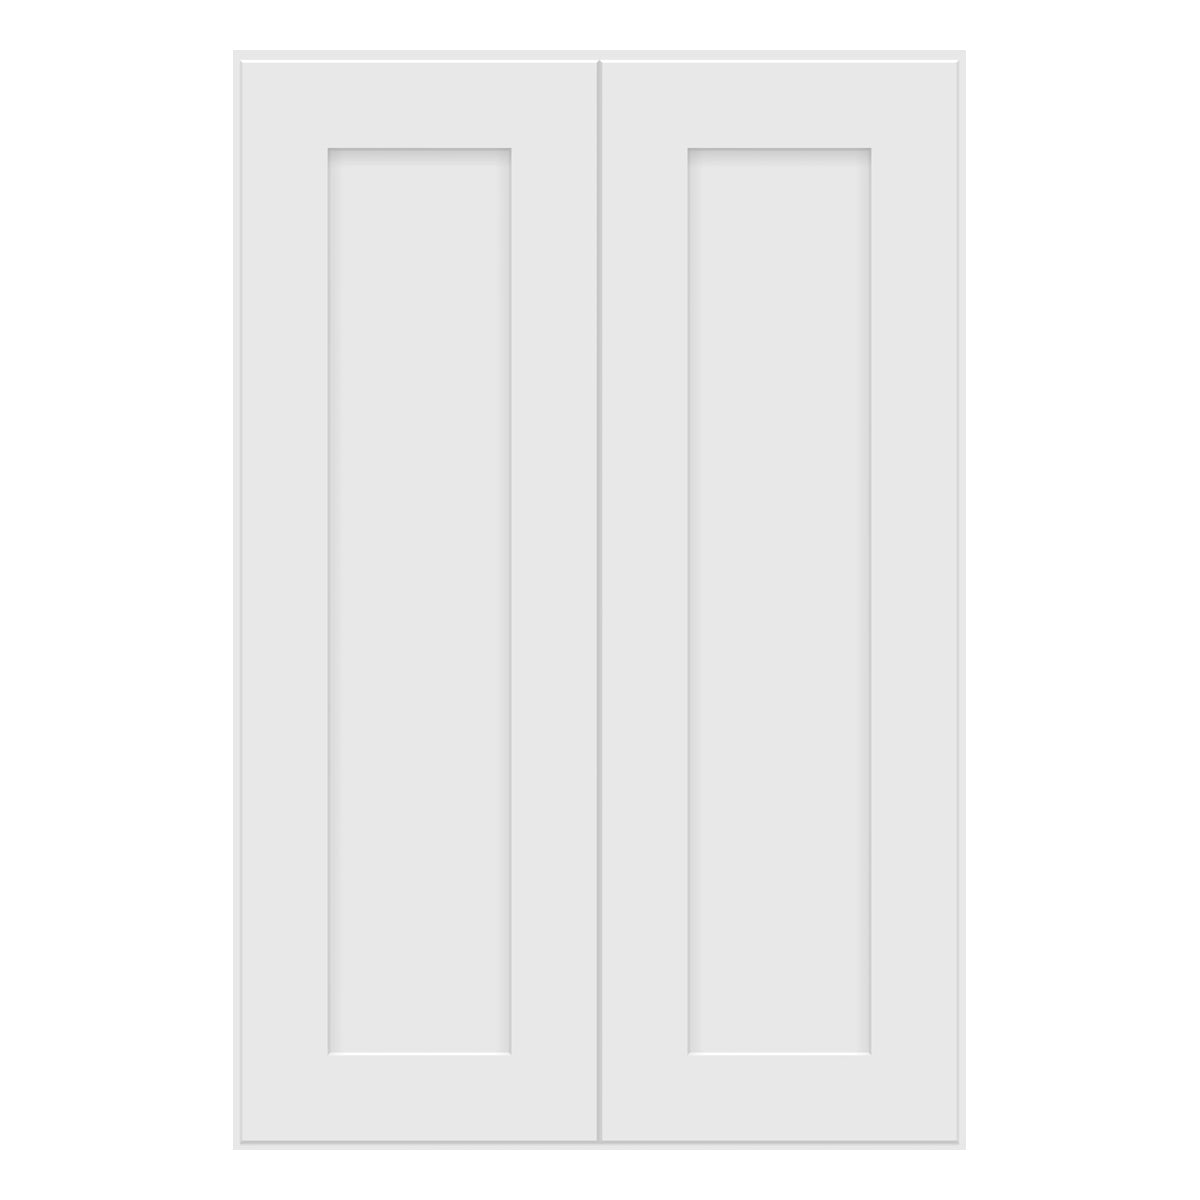 Craft Cabinetry Shaker White 24"W x 42"H Wall Cabinet